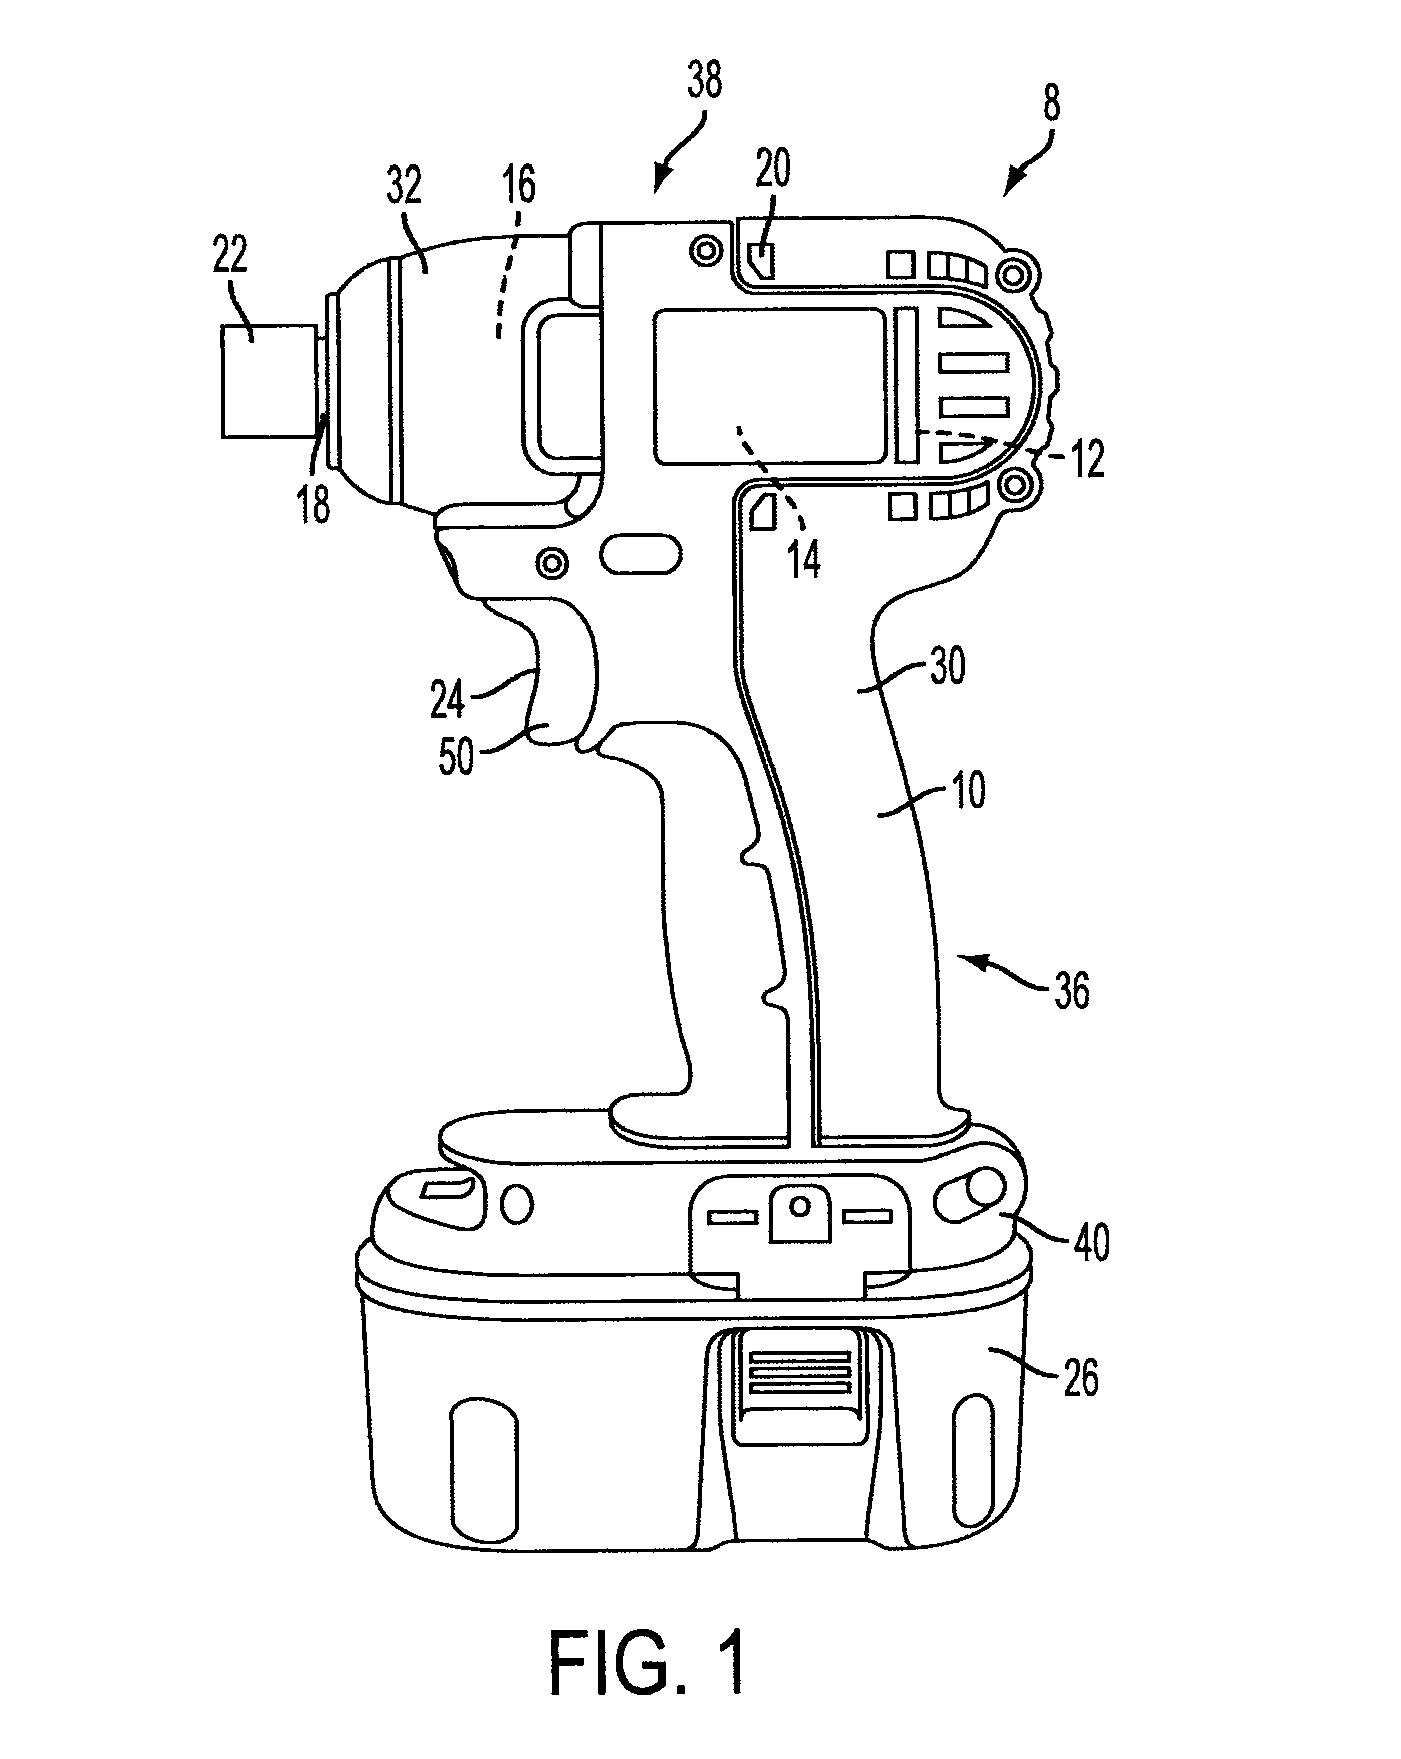 Hybrid impact tool with two-speed transmission